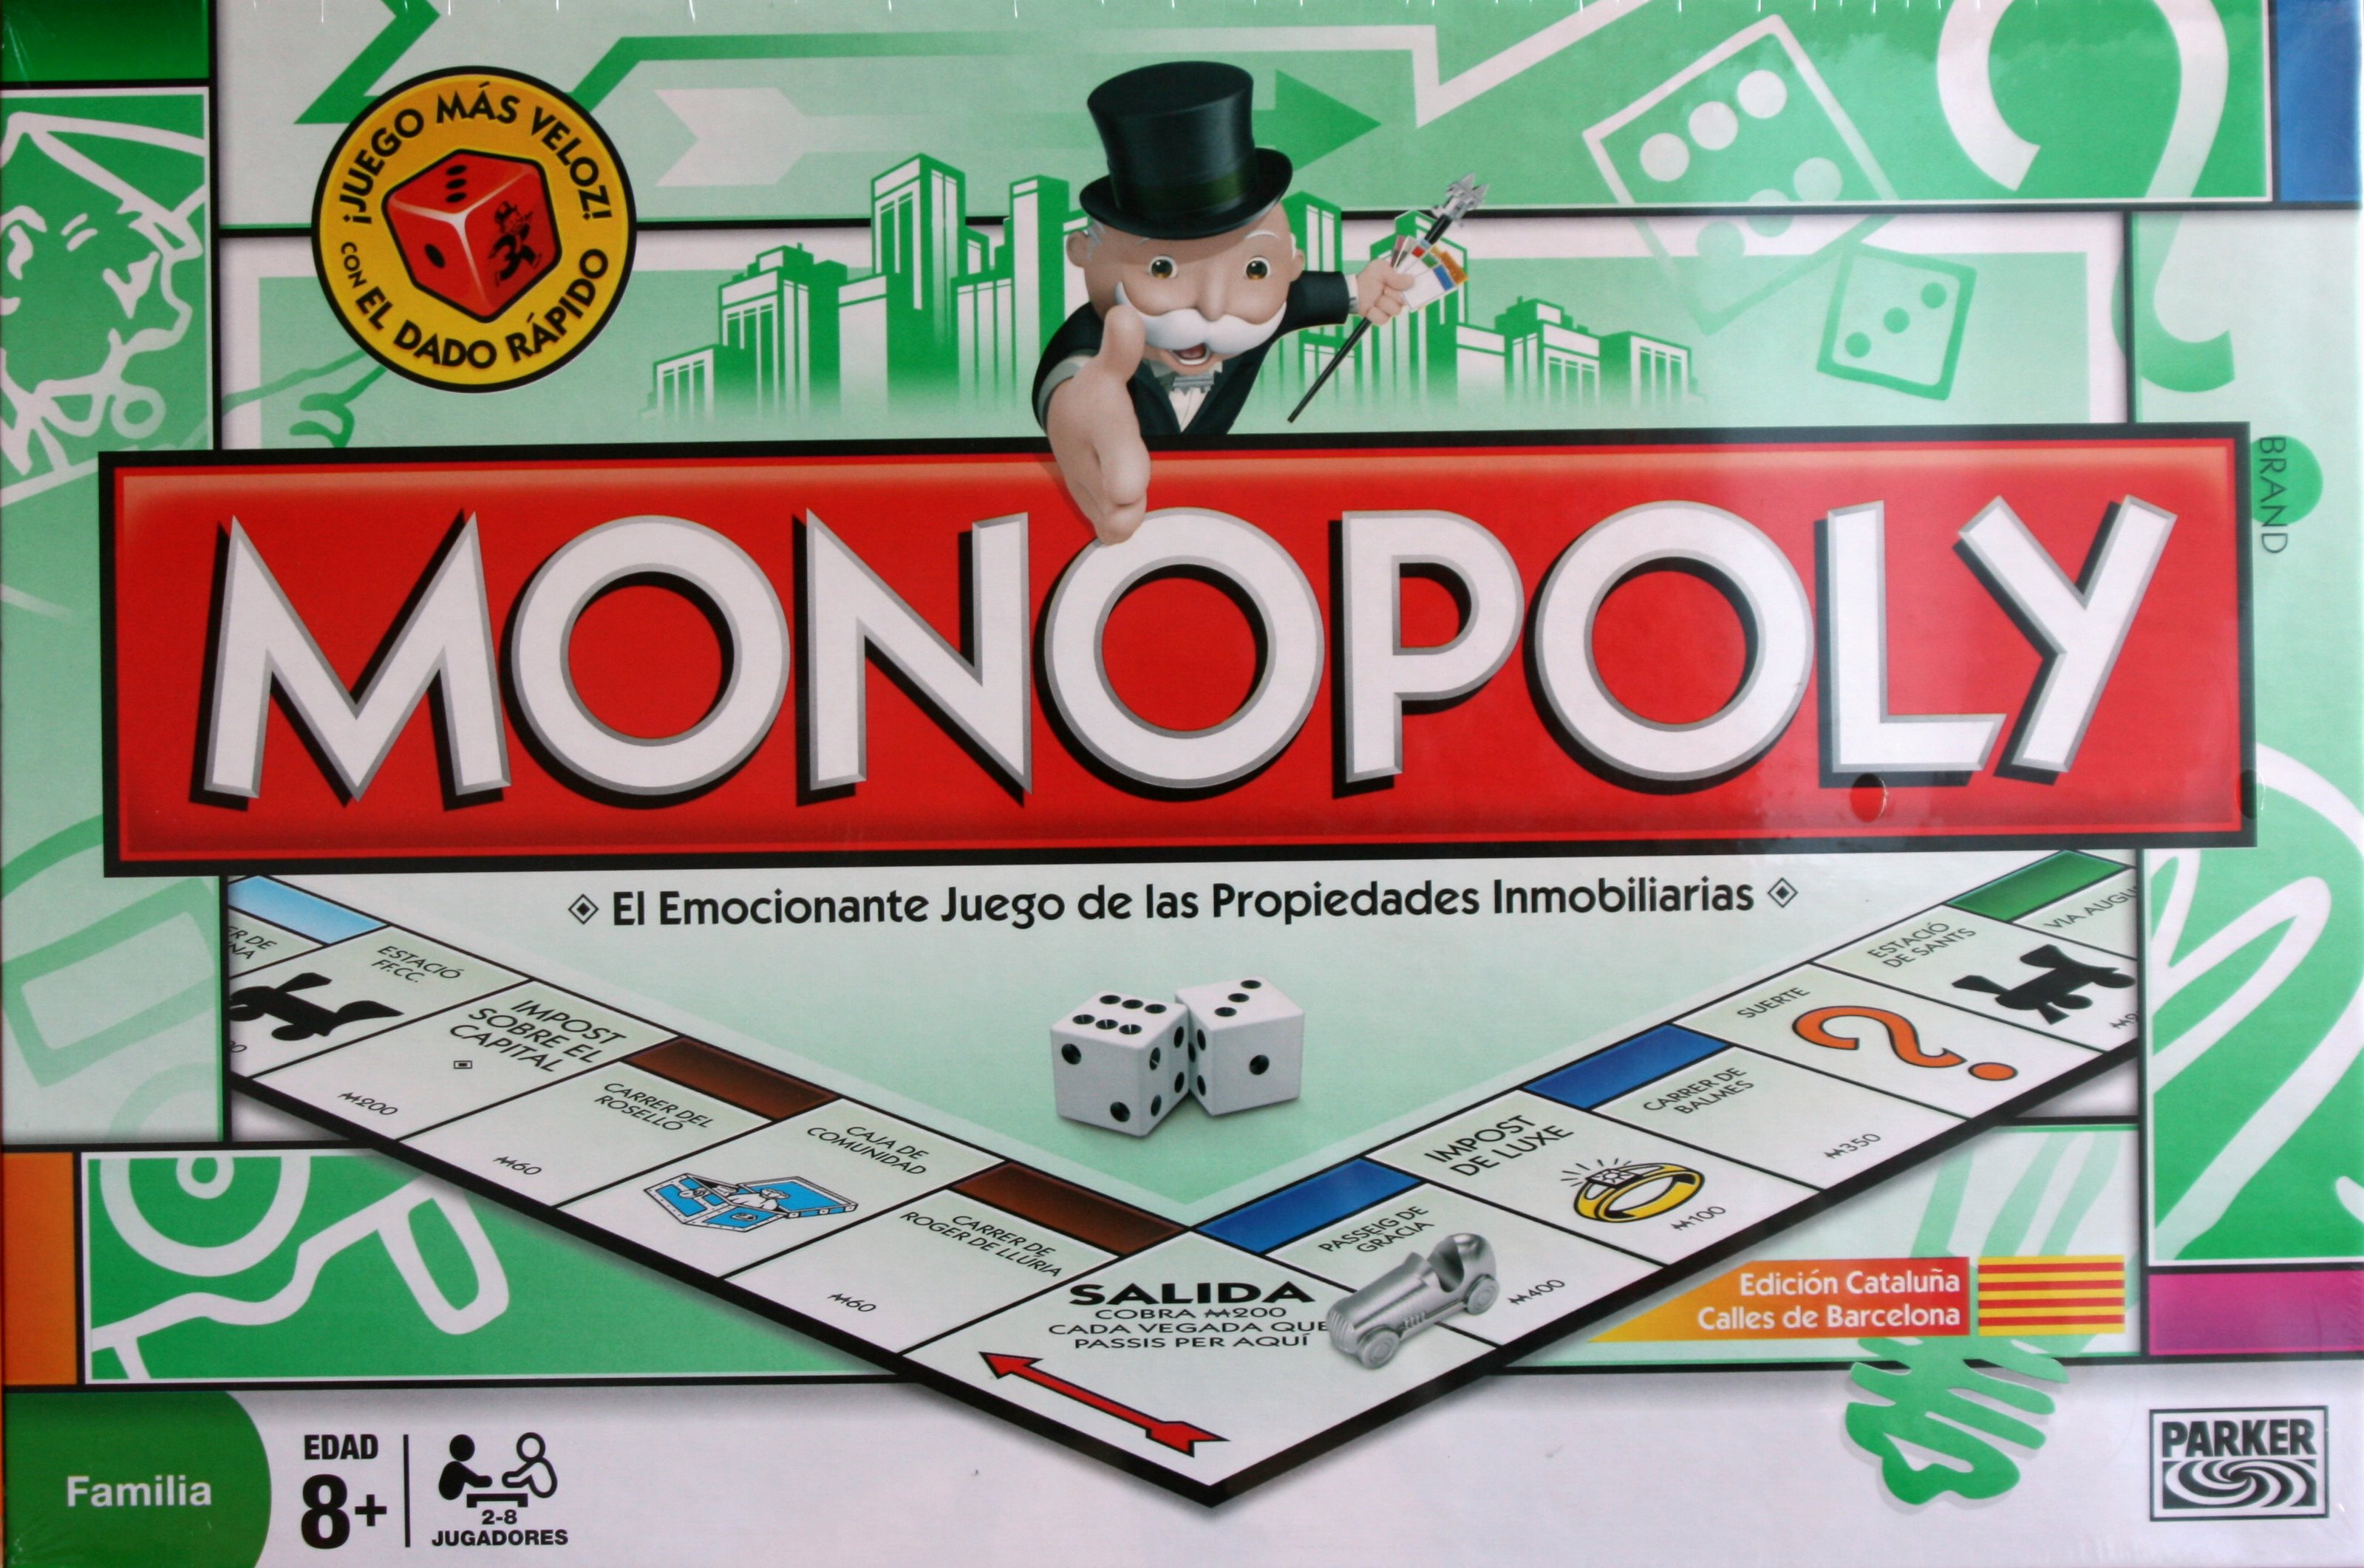 Monopoly 2008 by Parker brothers